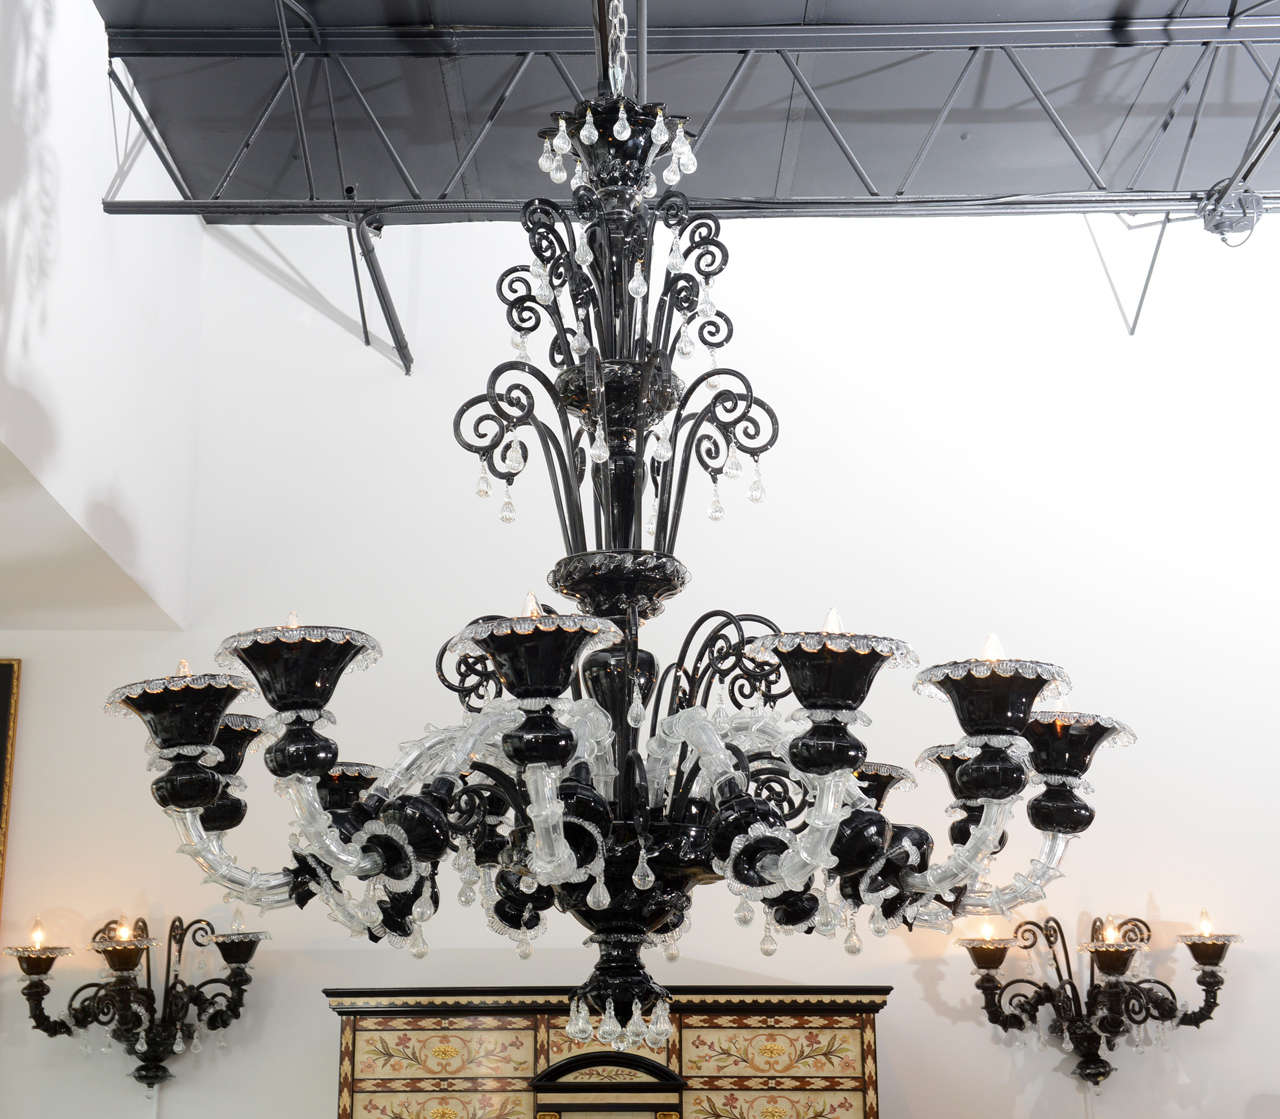 Chandelier with scrolling arms, pendants and drops.
Marked Murano.